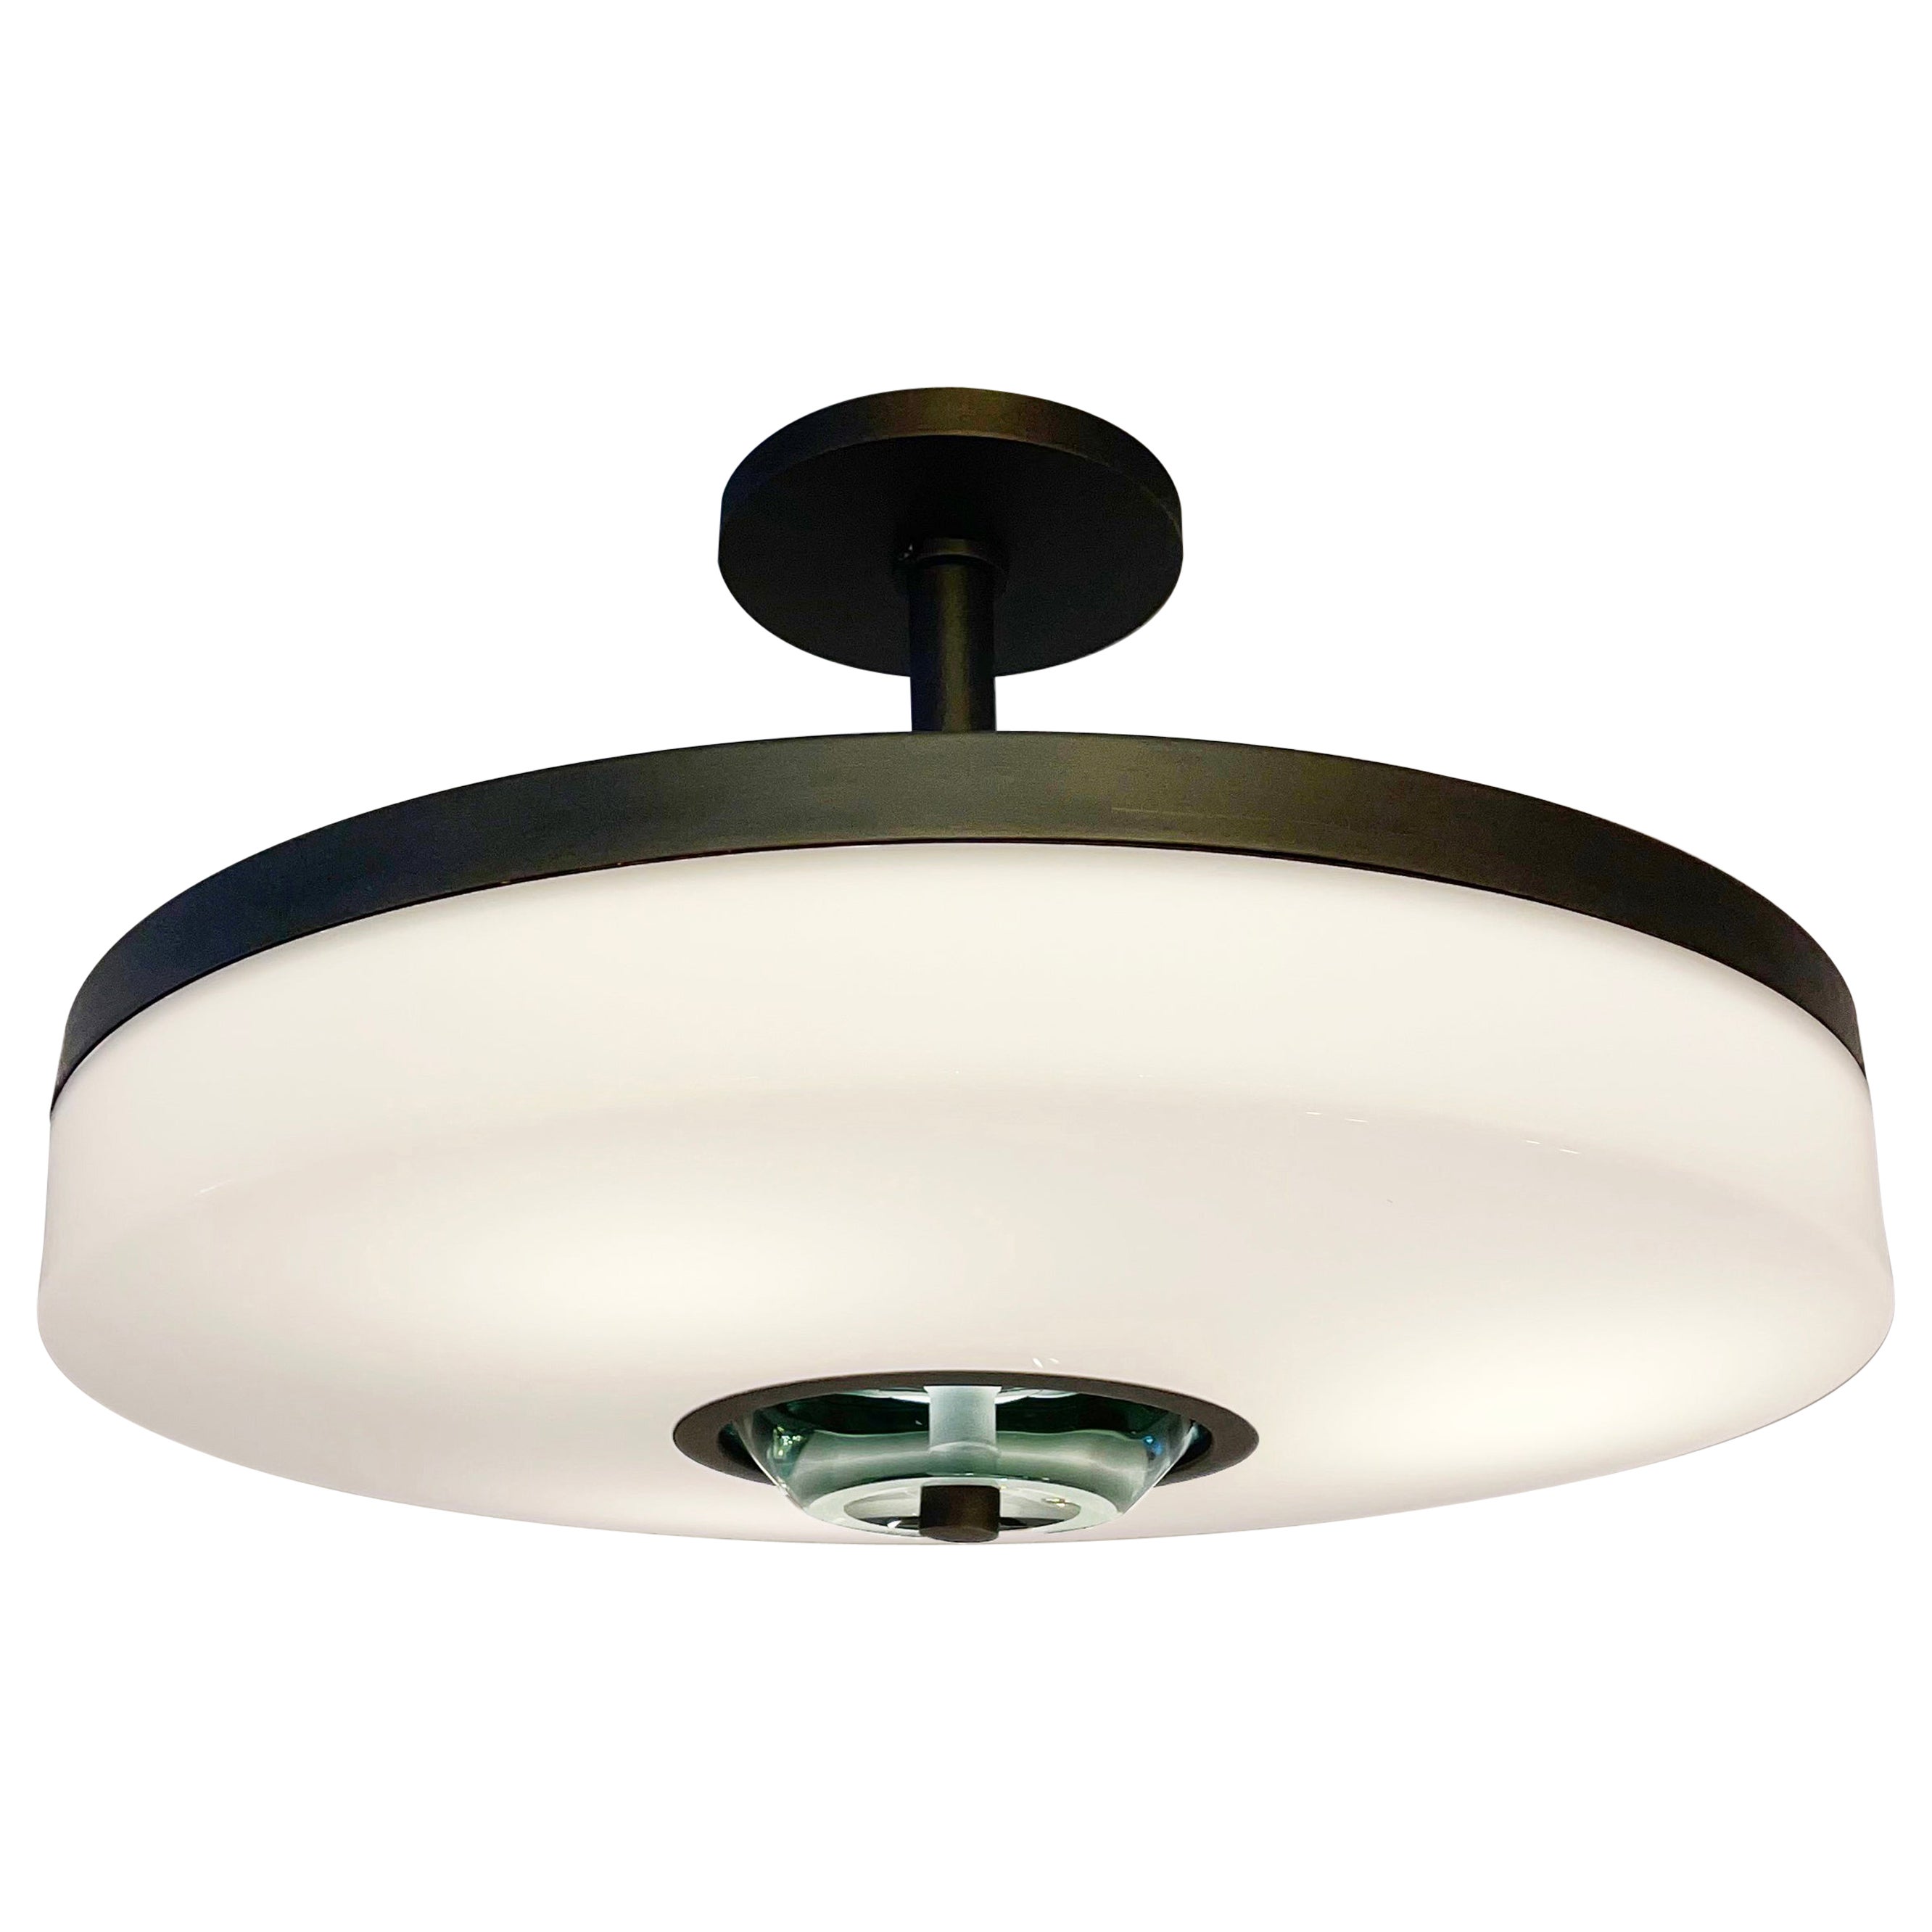 Iris Piccolo Ceiling Light by Gaspare Asaro, Green Glass Version For Sale